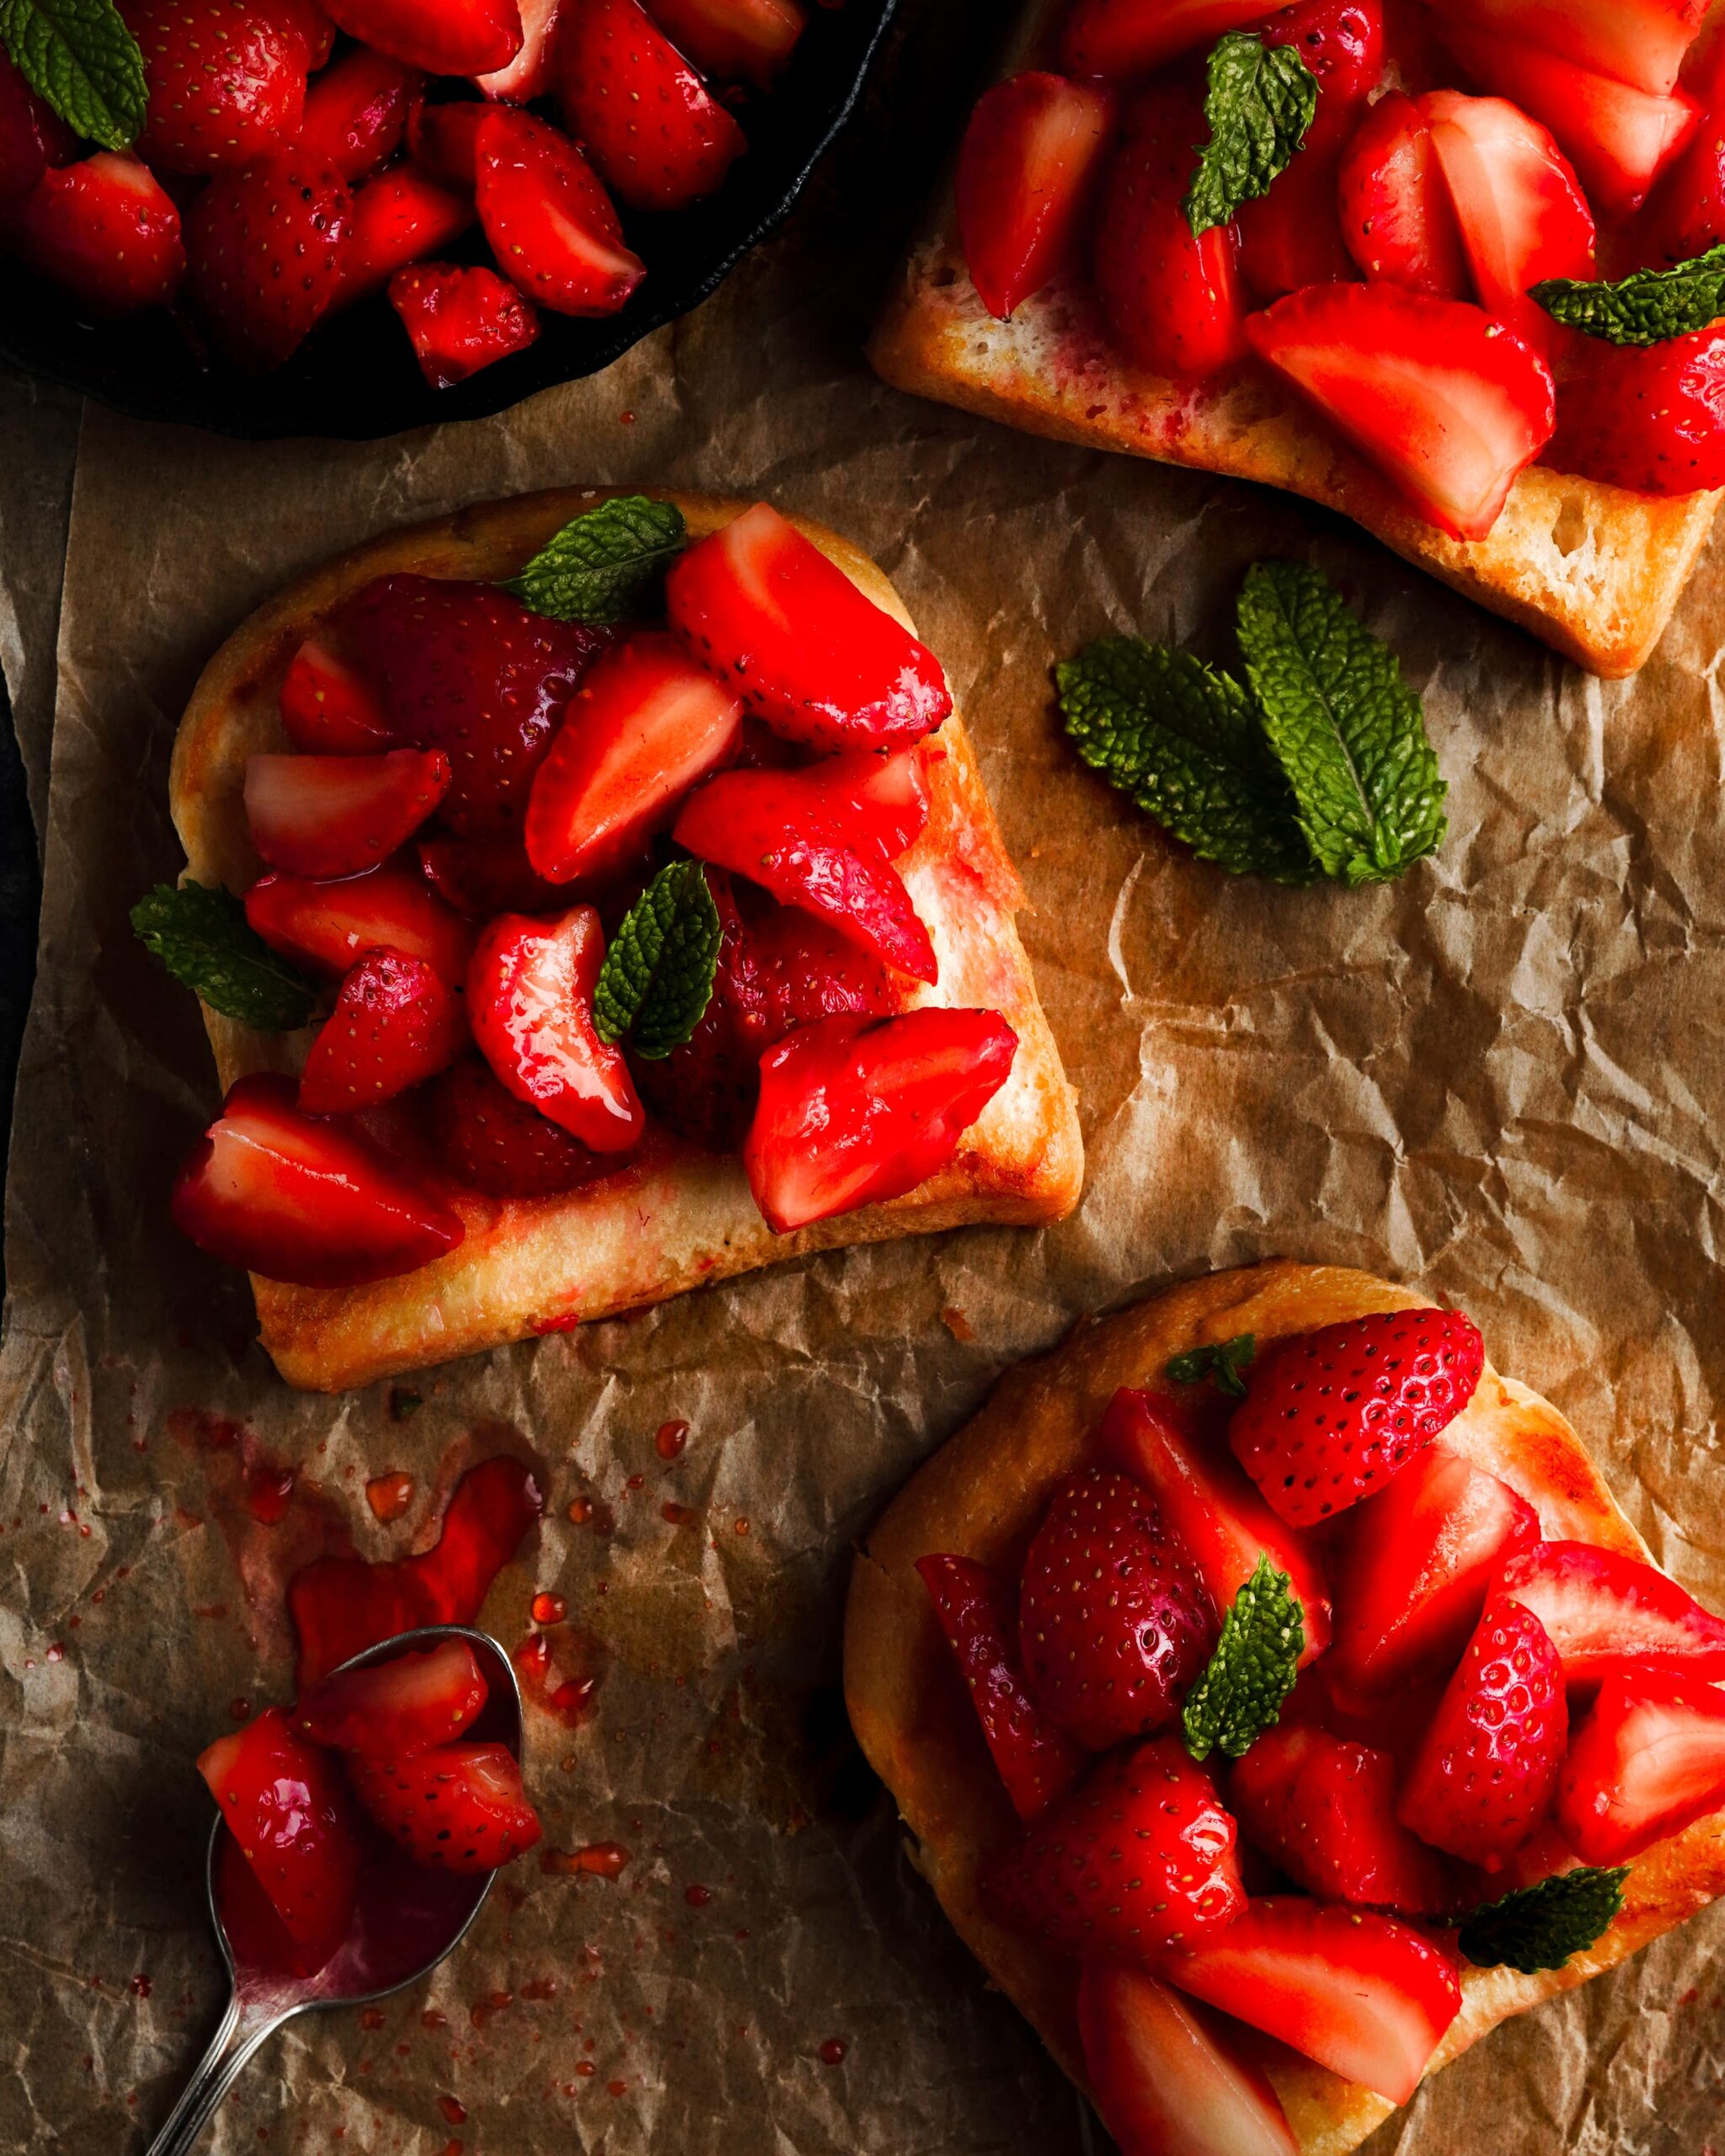 Brioche topped with strawberries